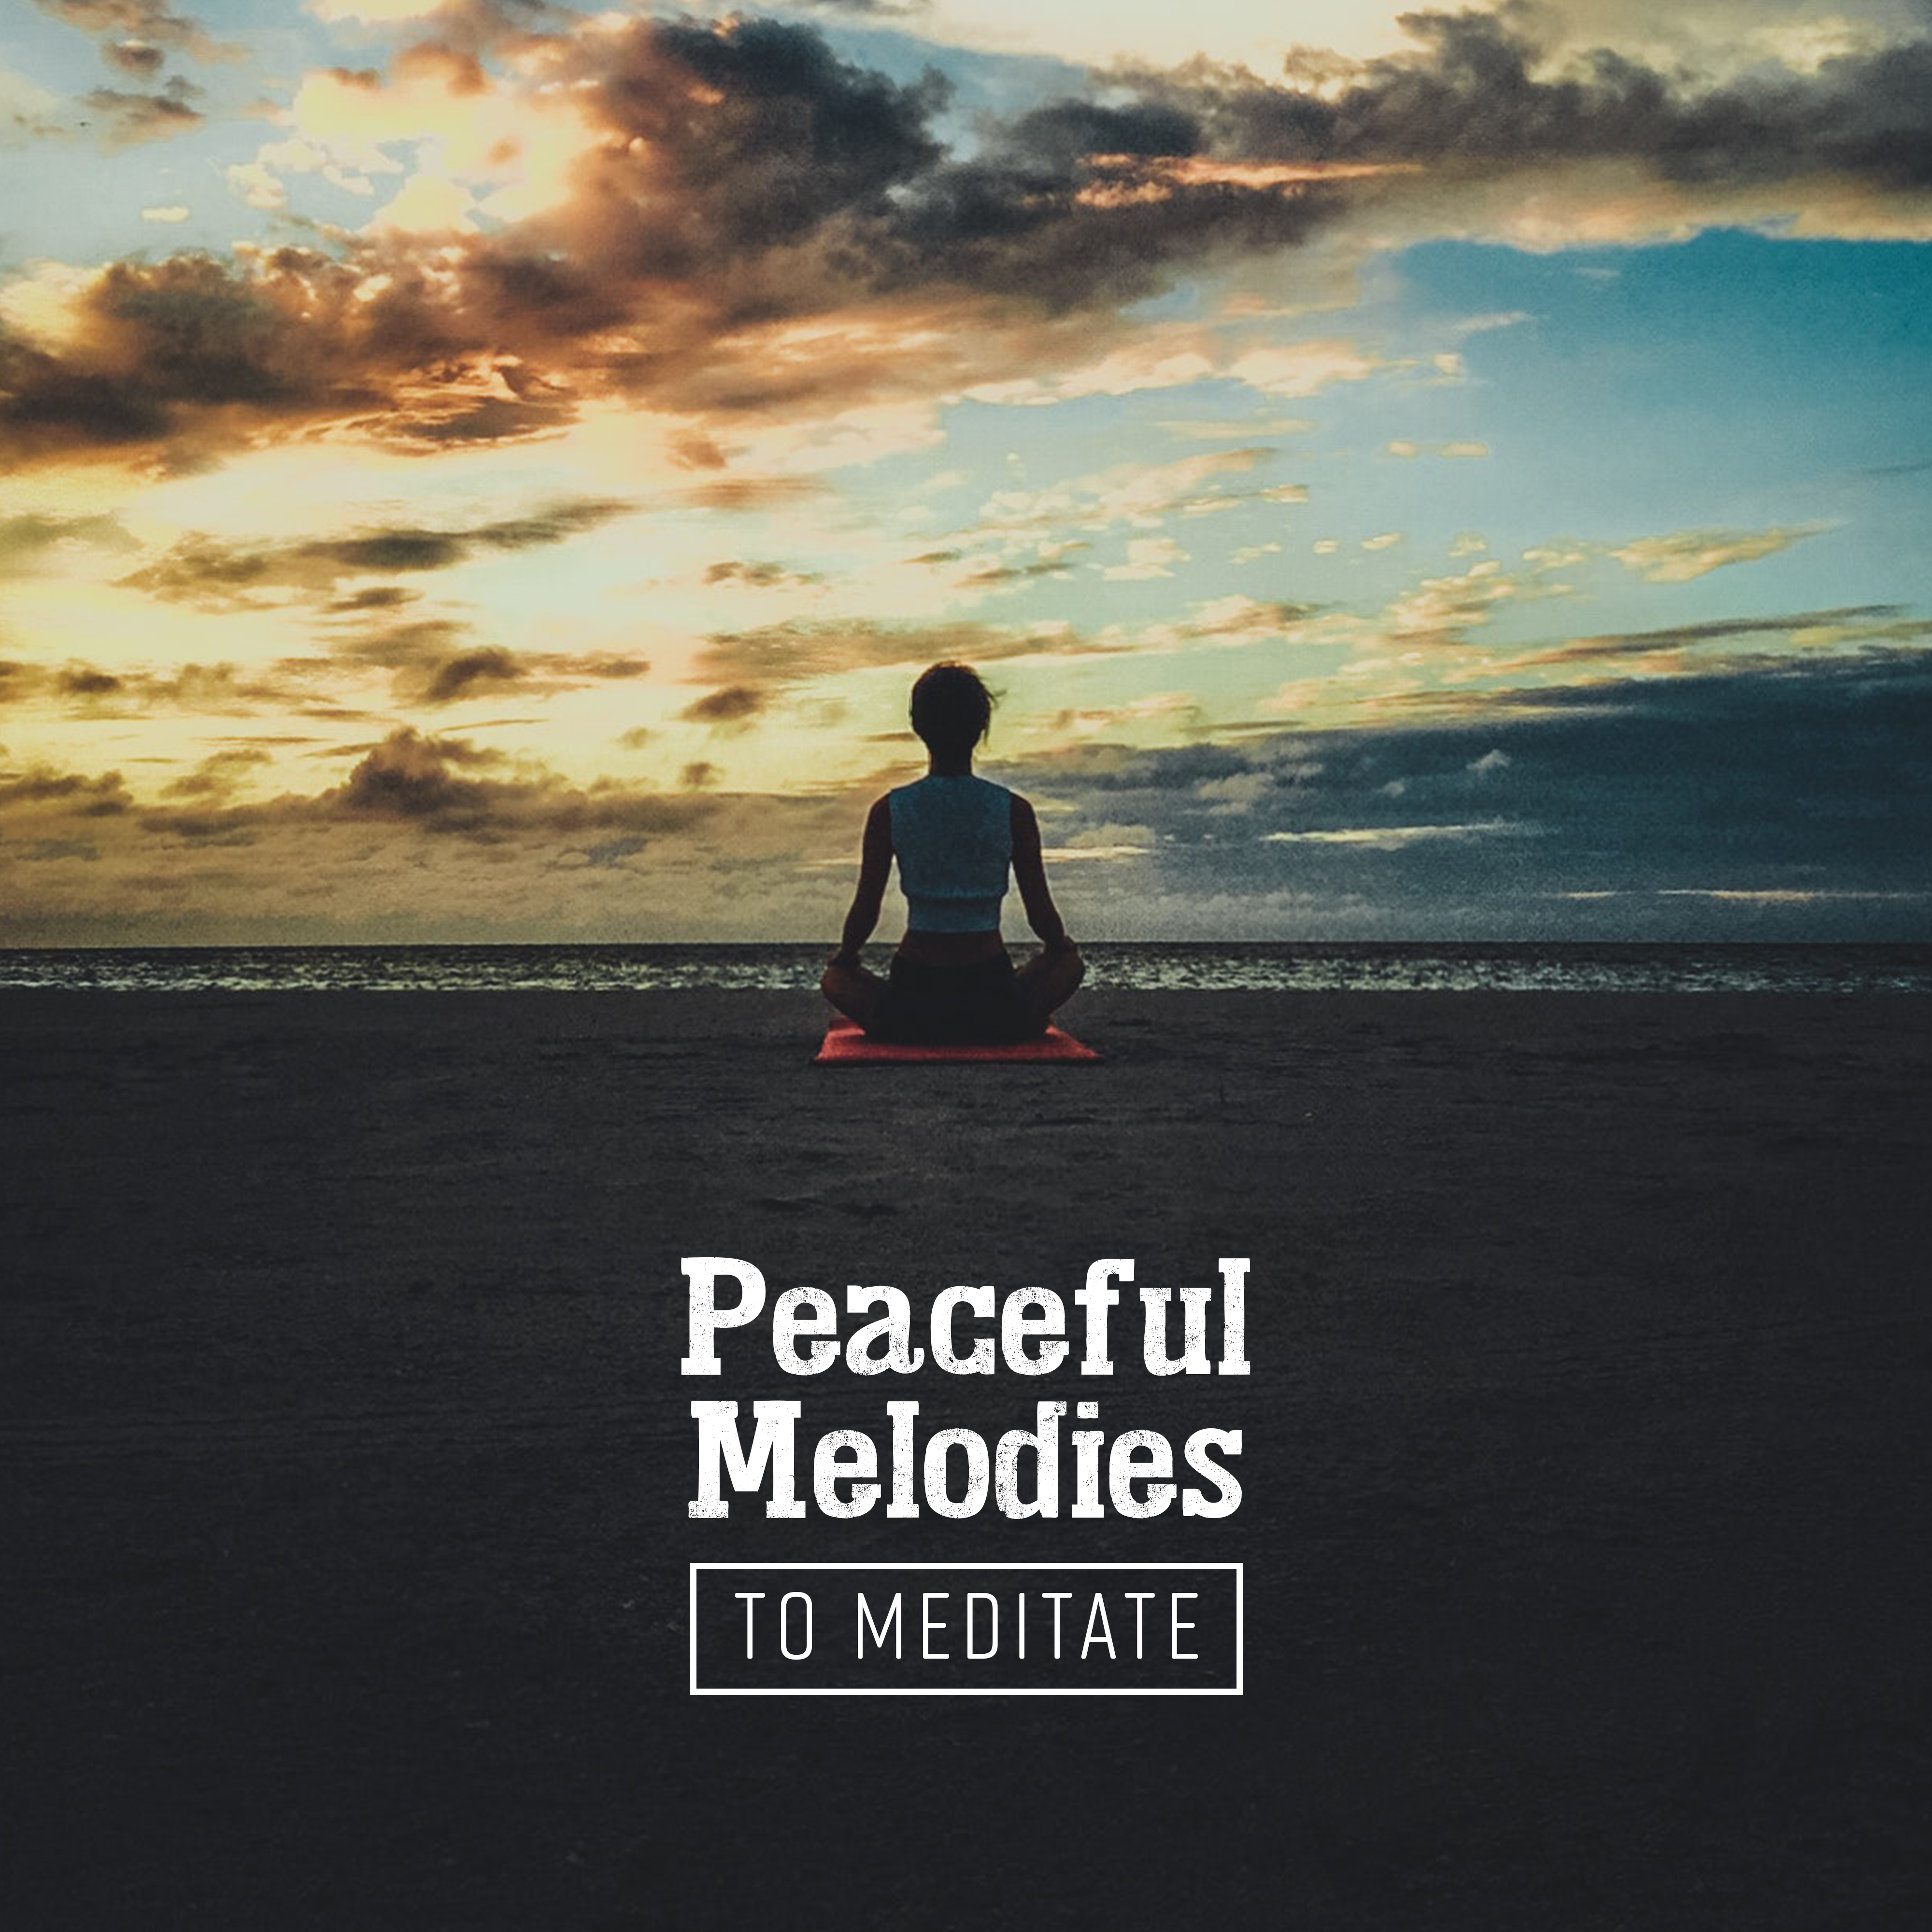 Peaceful Melodies to Meditate